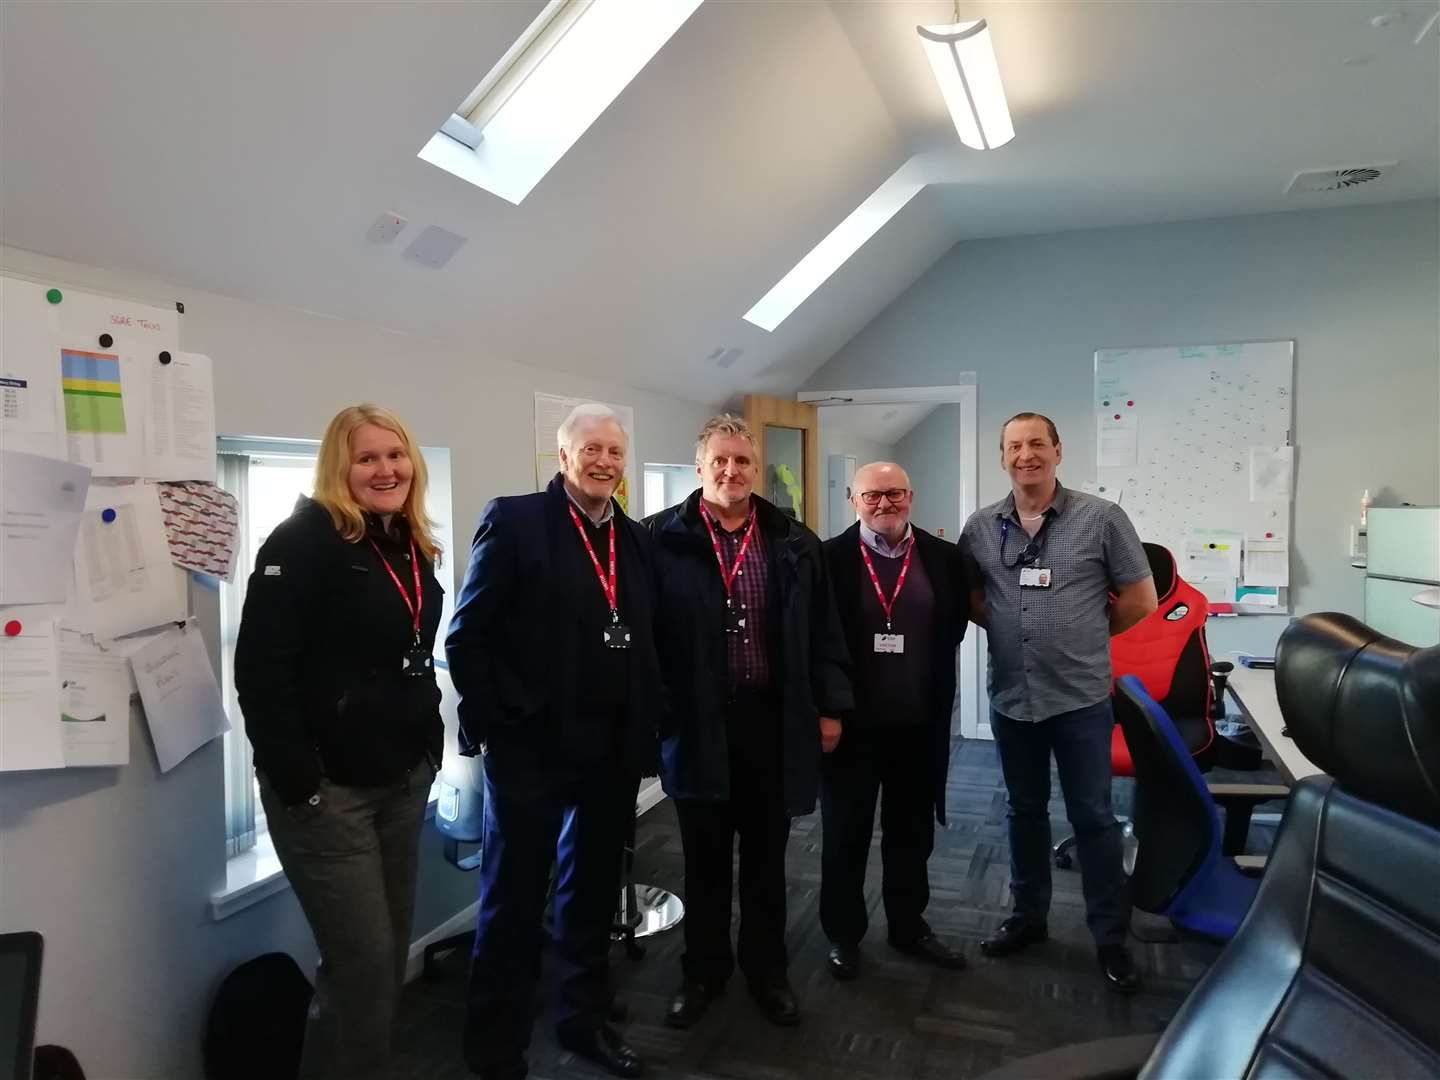 Visiting the Beatrice Offshore Windfarm Ltd facility in Wick are (from left) Helen Martin, STUC assistant general secretary; Grahame Smith, STUC general secretary; John Deighan and Davie Alexander of Thurso and Wick Trades Union Council; and Alan Paul, of SSE.